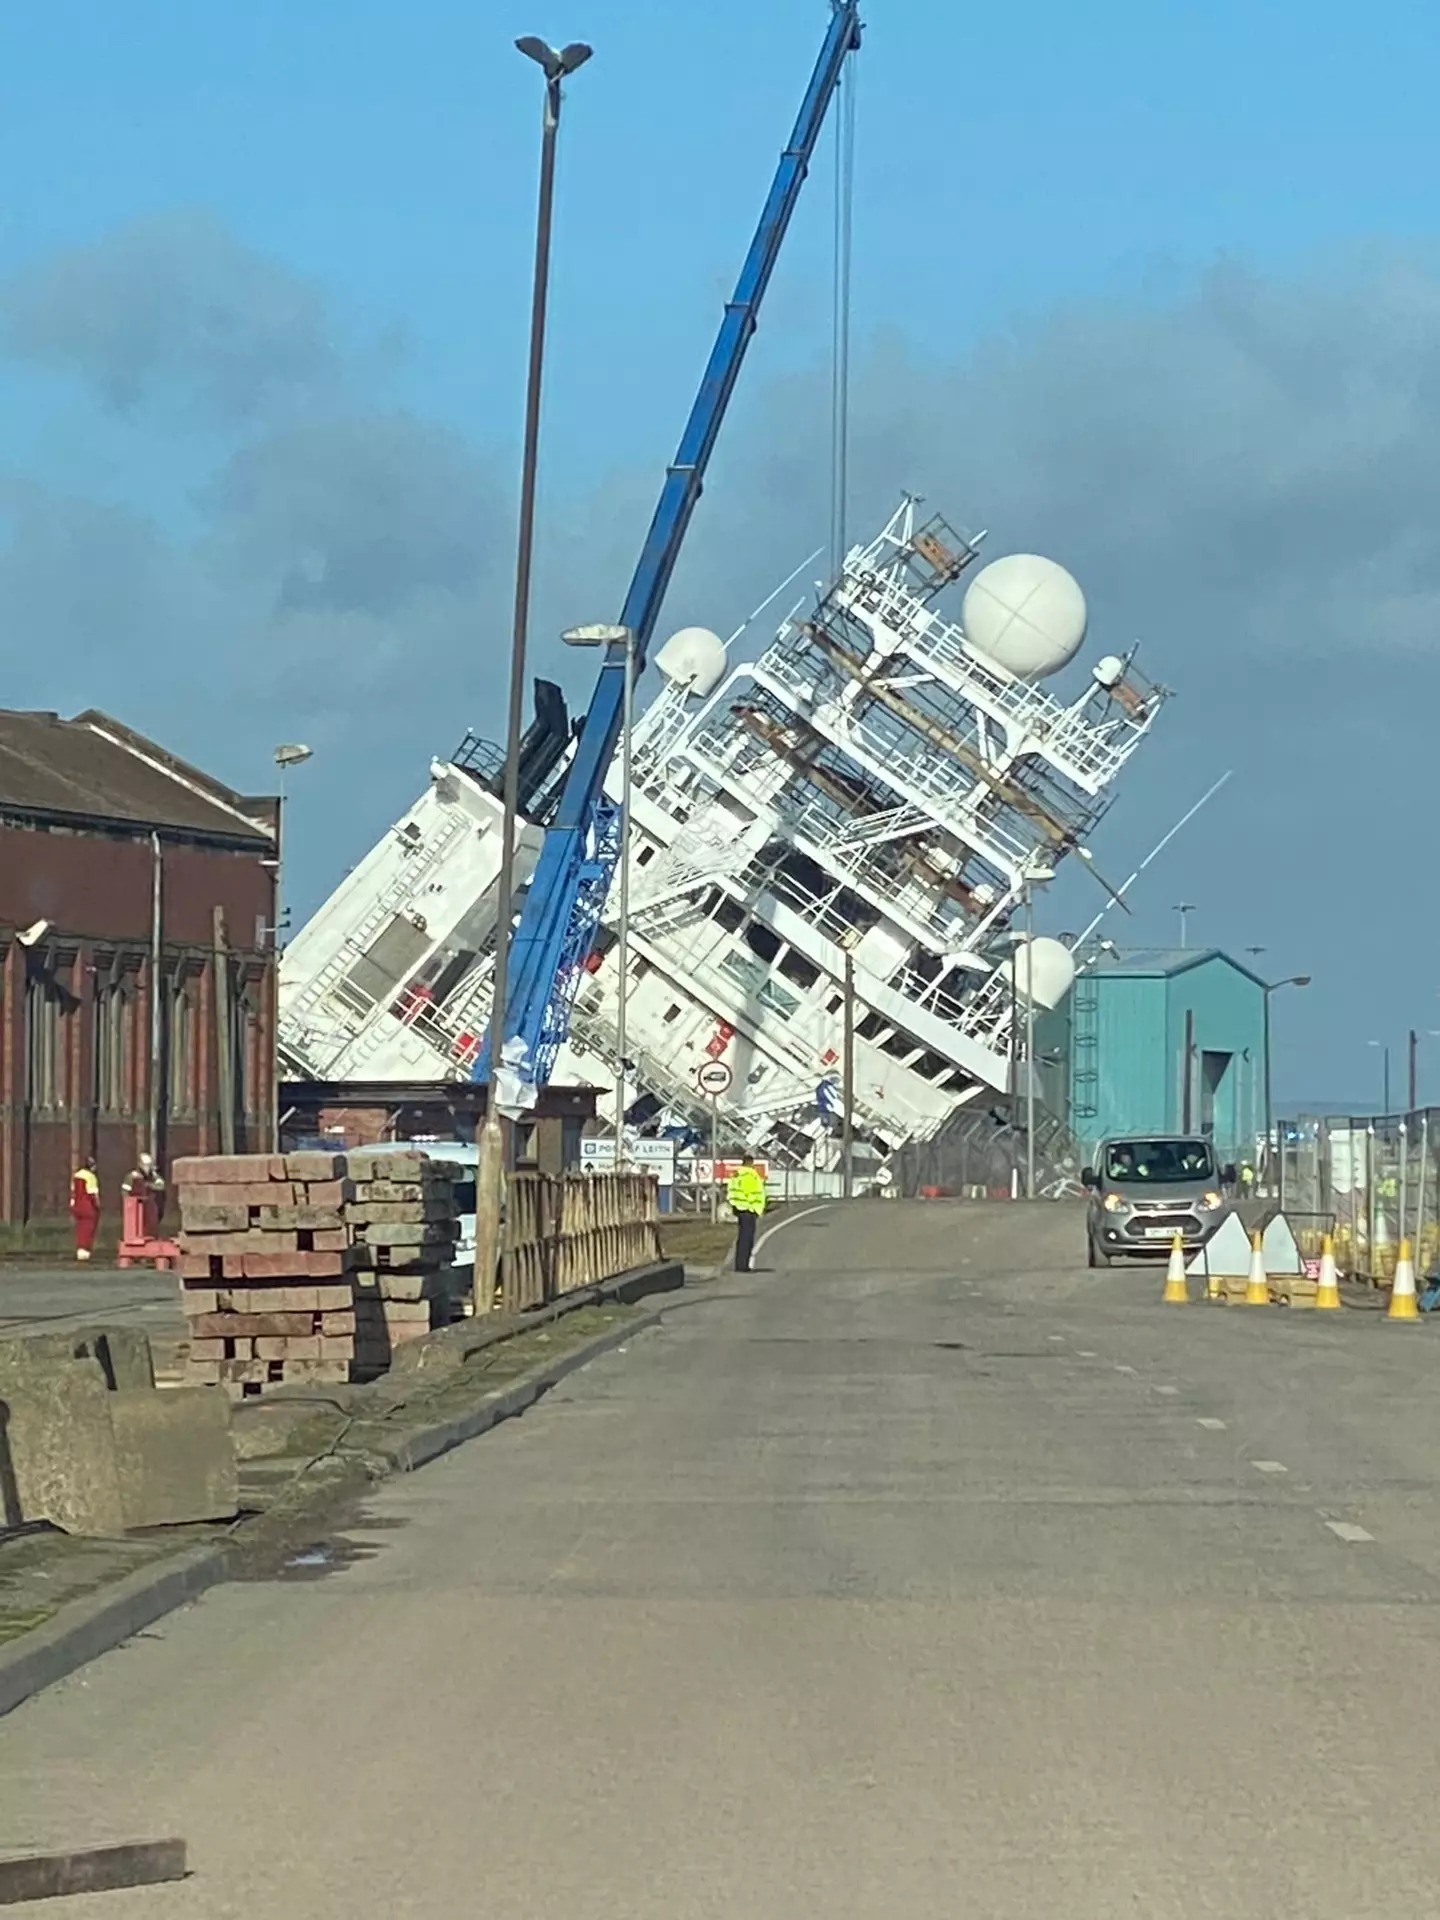 People have been injured after the research vessel Petrel toppled in the dock.